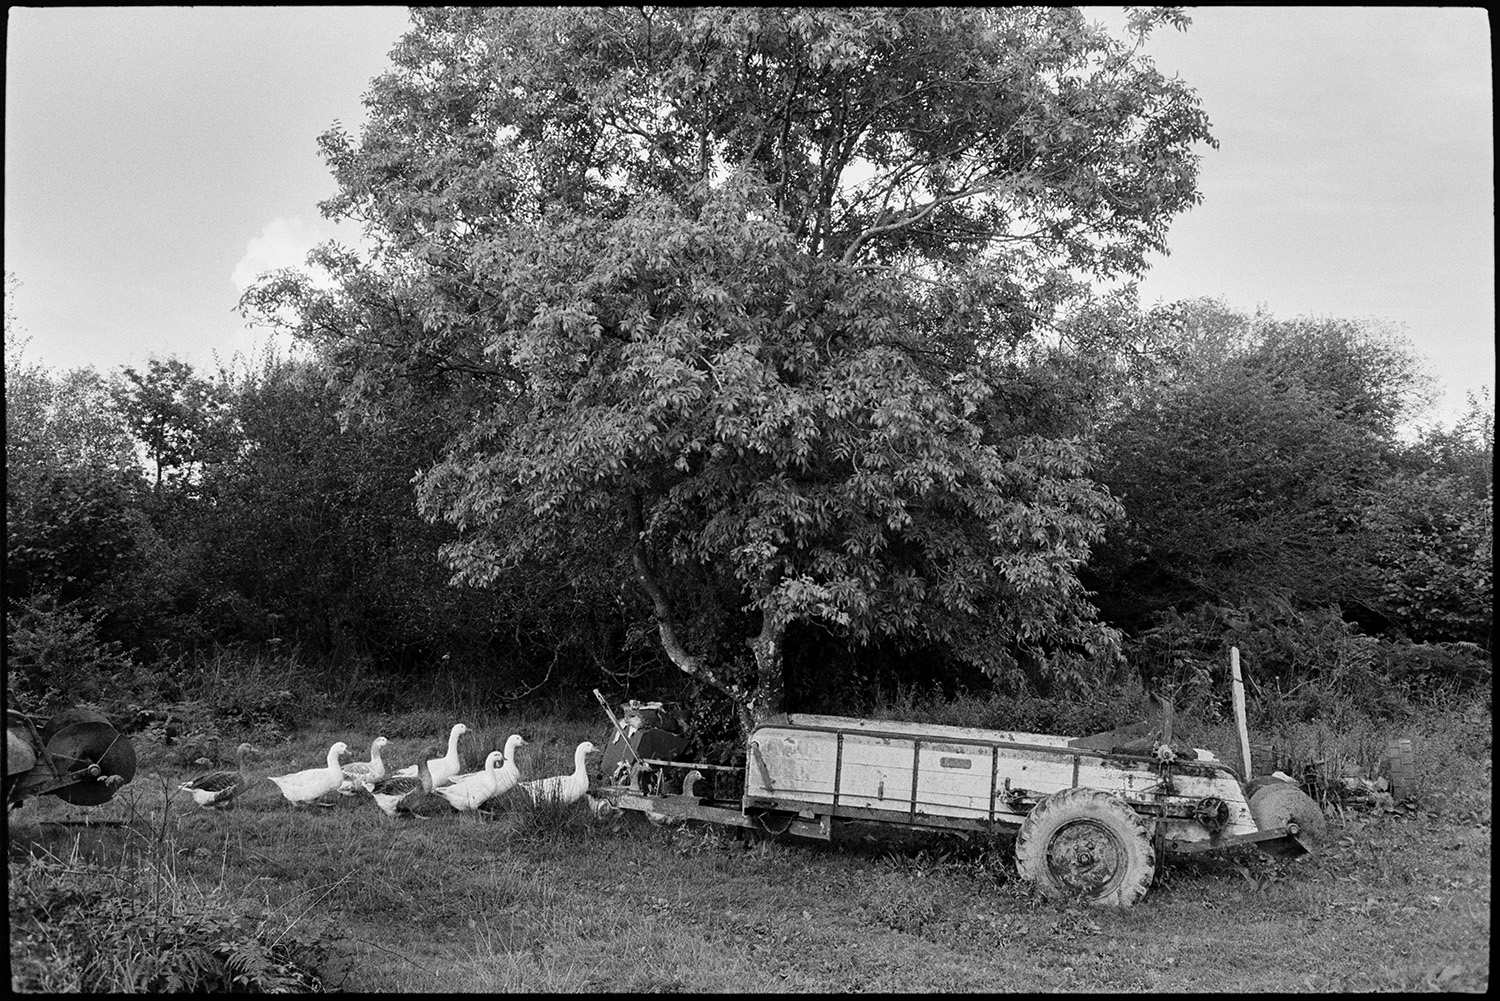 Geese on moor going past old muck spreader.
[Geese walking around an old muck spreader under a tree in a field, at Cuppers Piece, Beaford.]